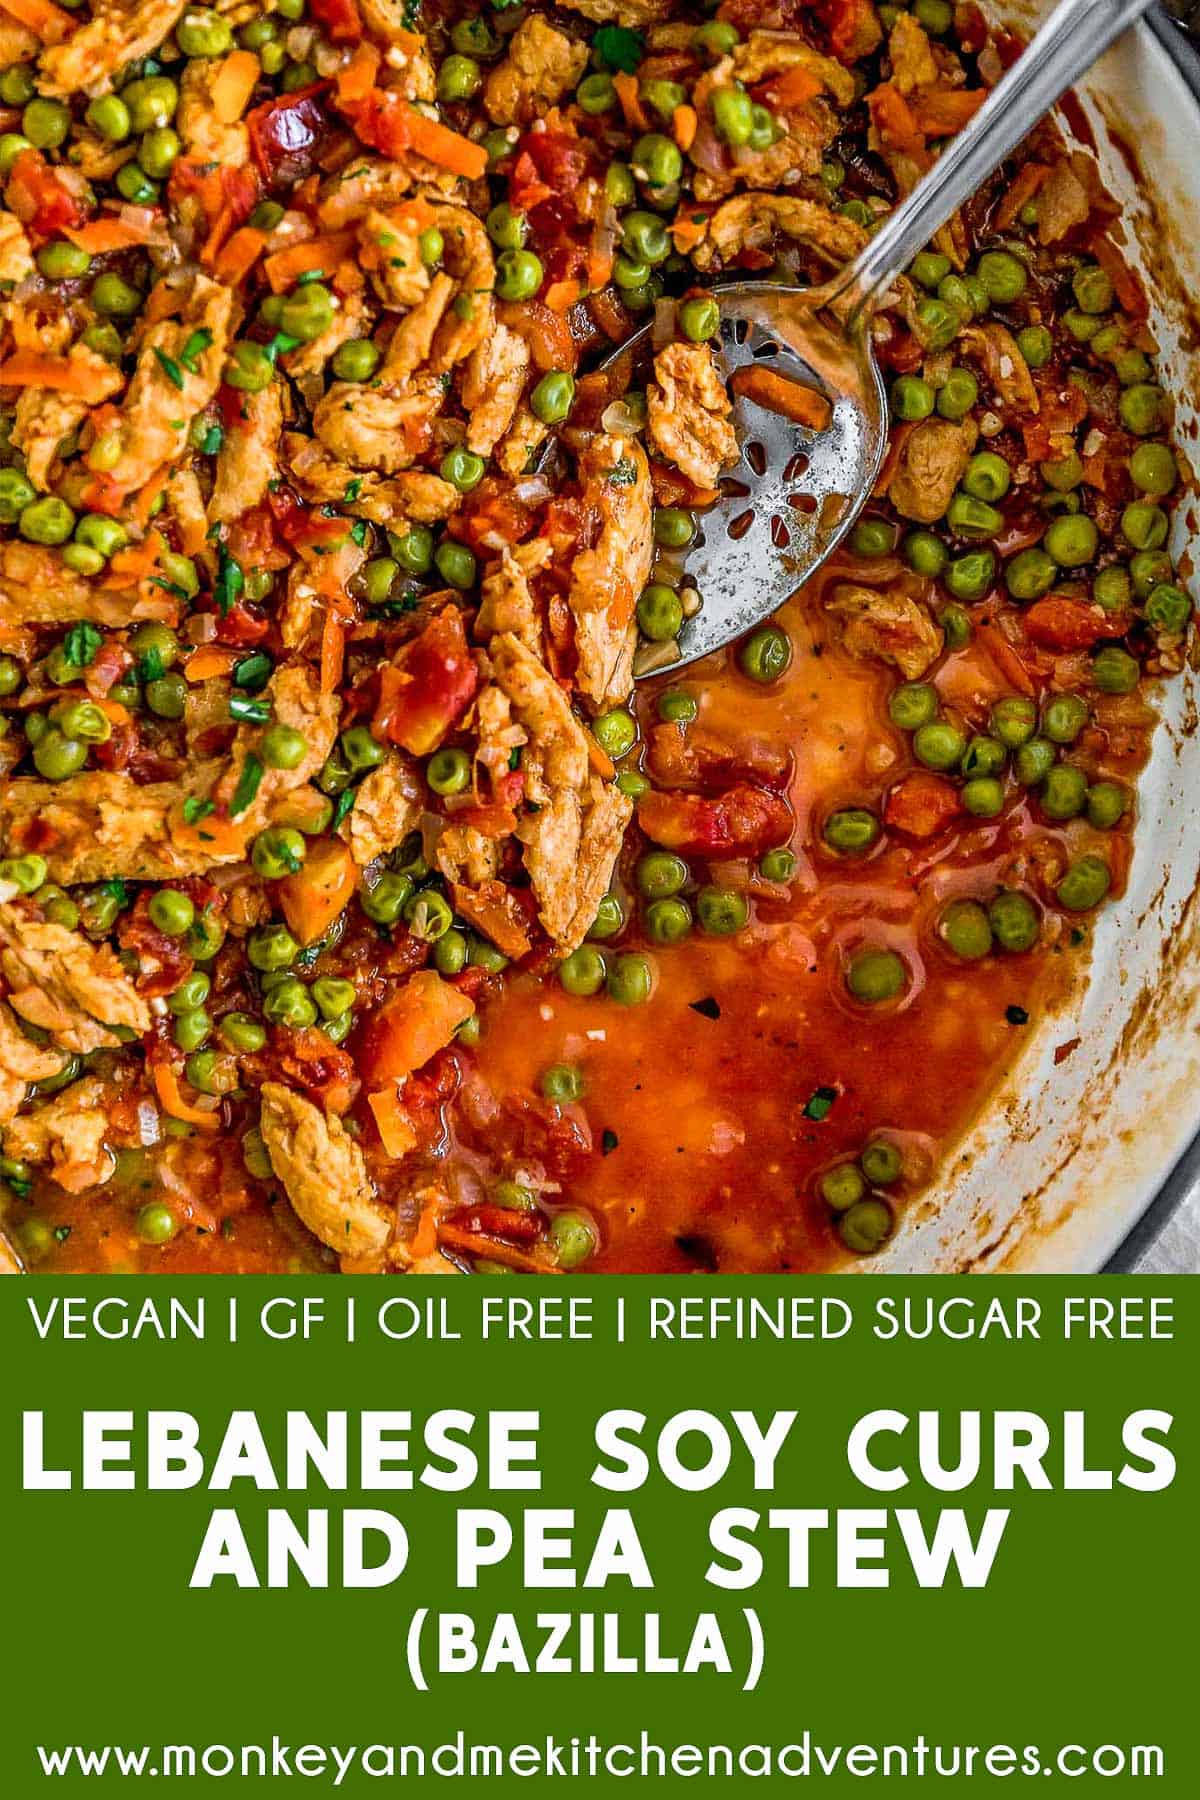 Lebanese Soy Curls and Pea Stew (Bazilla) with text description